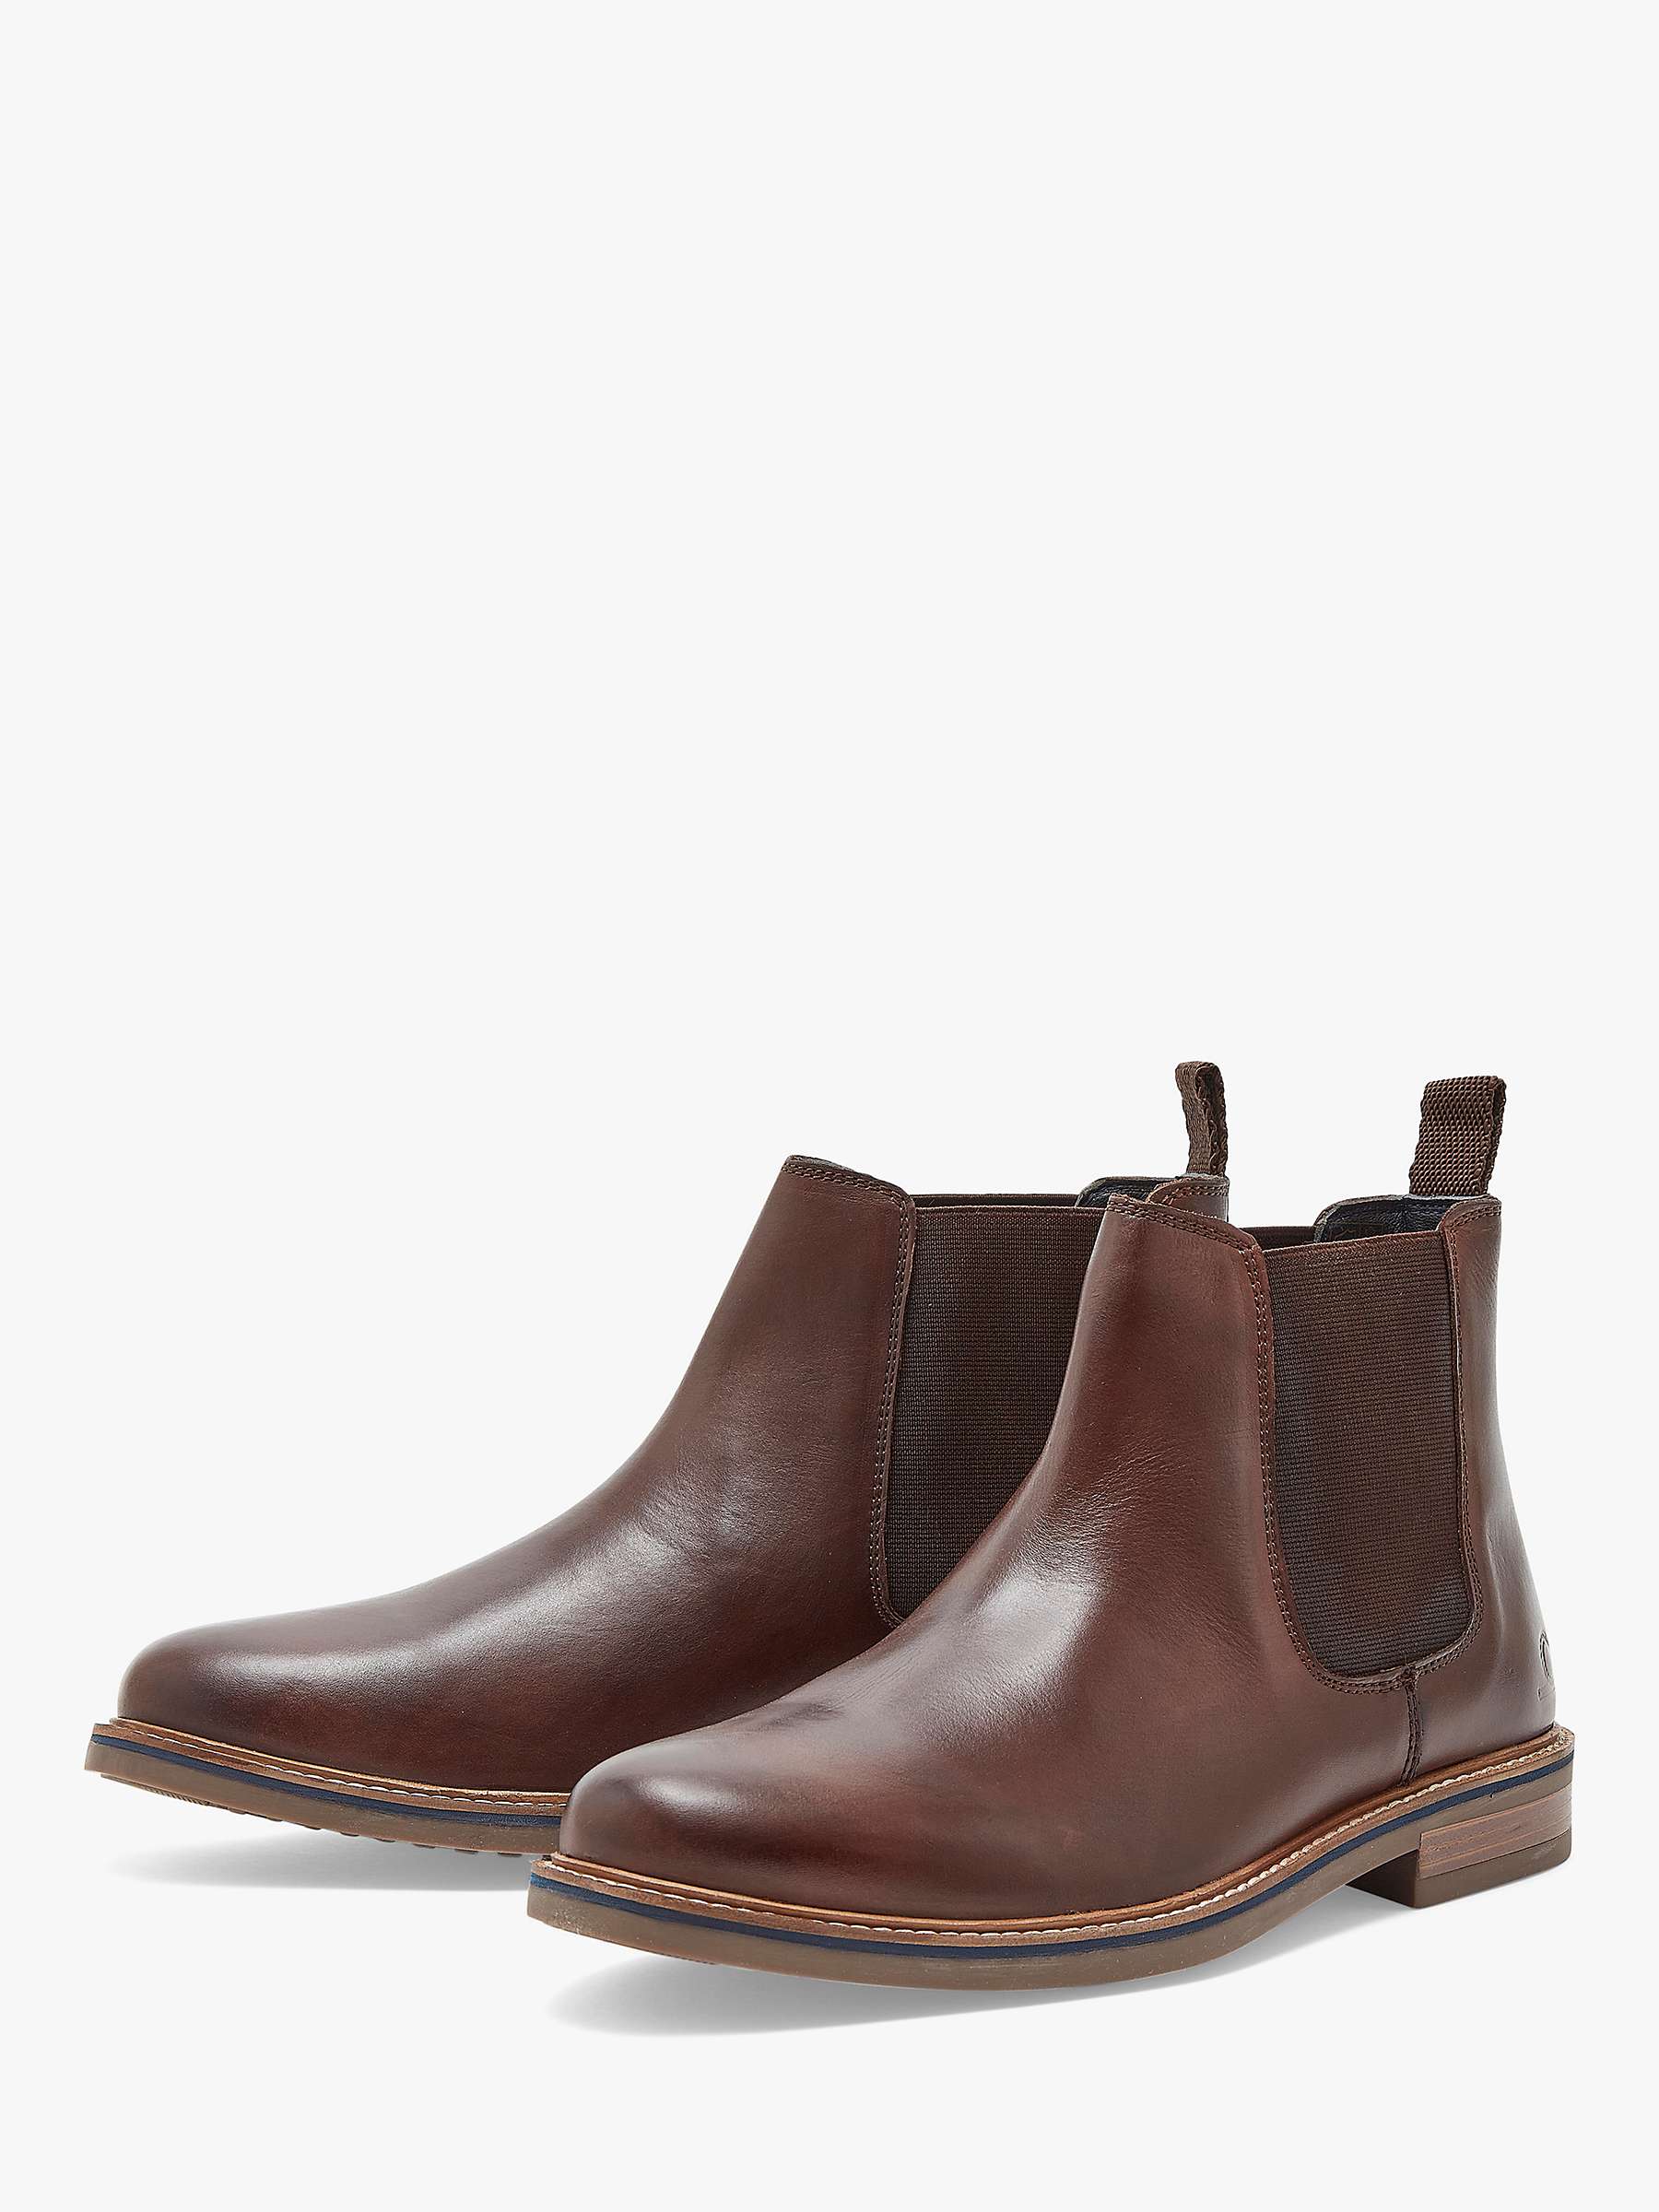 Buy Chatham Scafell Chelsea Boots, Brown Online at johnlewis.com